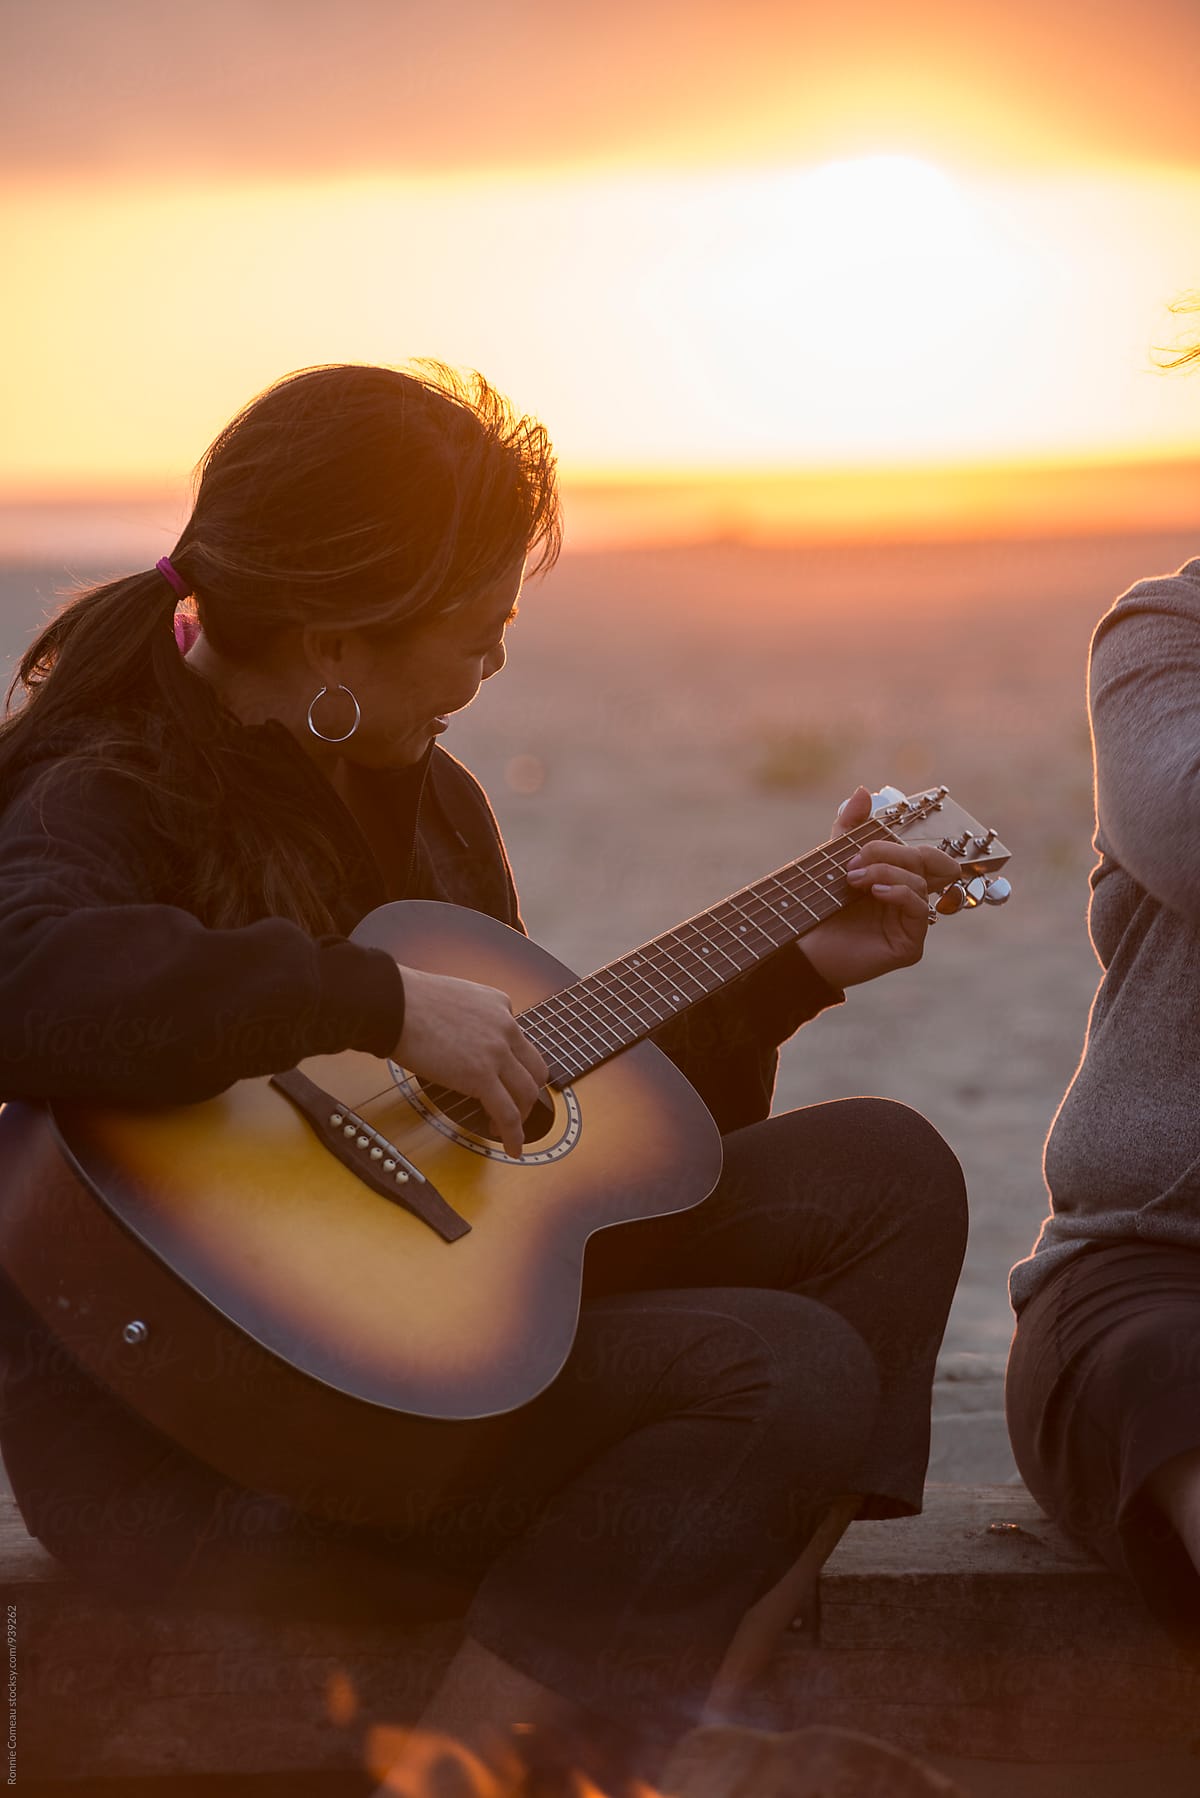 Woman Playing Guitar At The Beach At Sunset By Stocksy Contributor